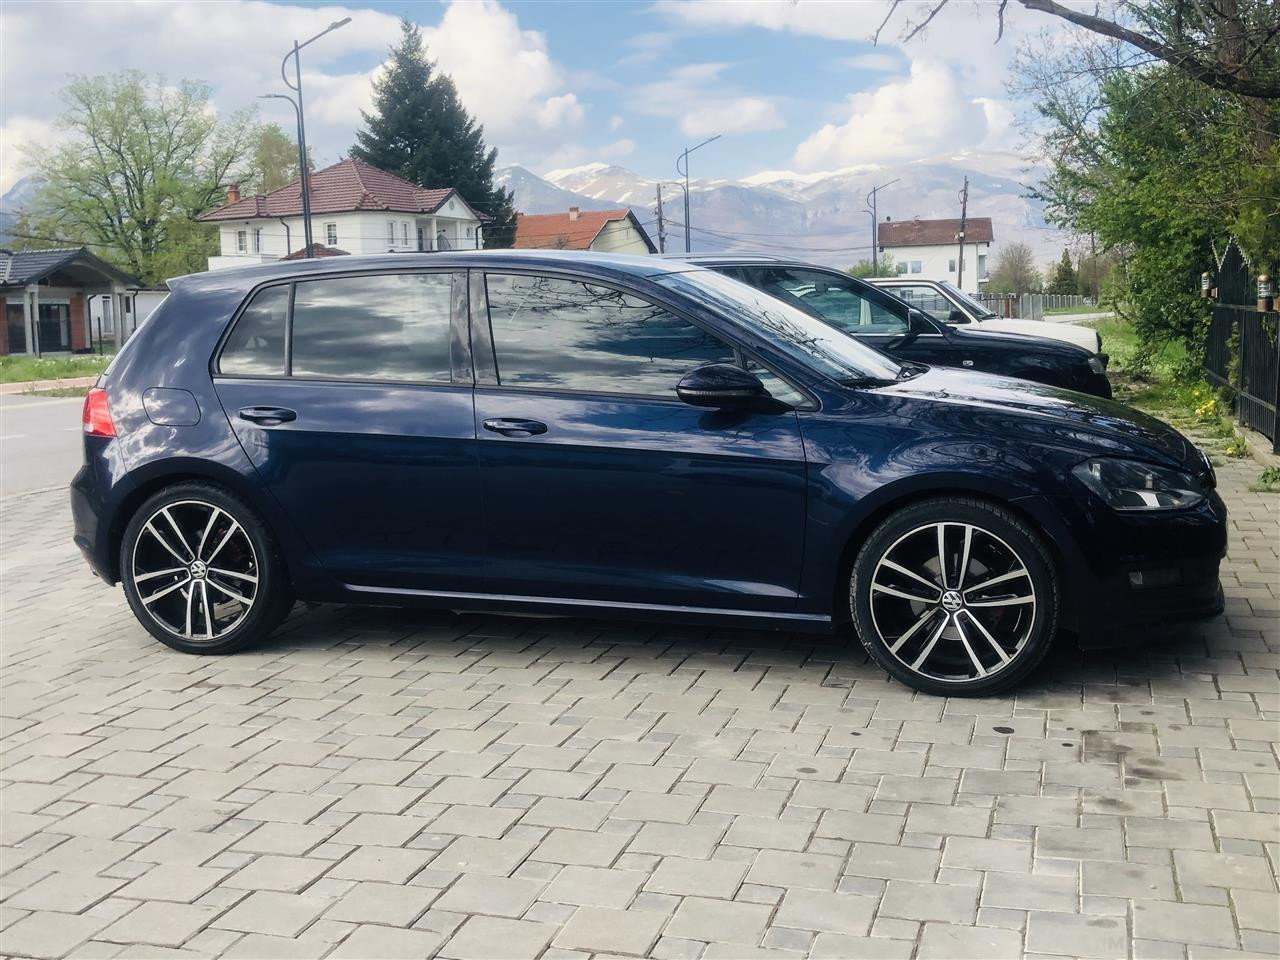 Shes golf 7 